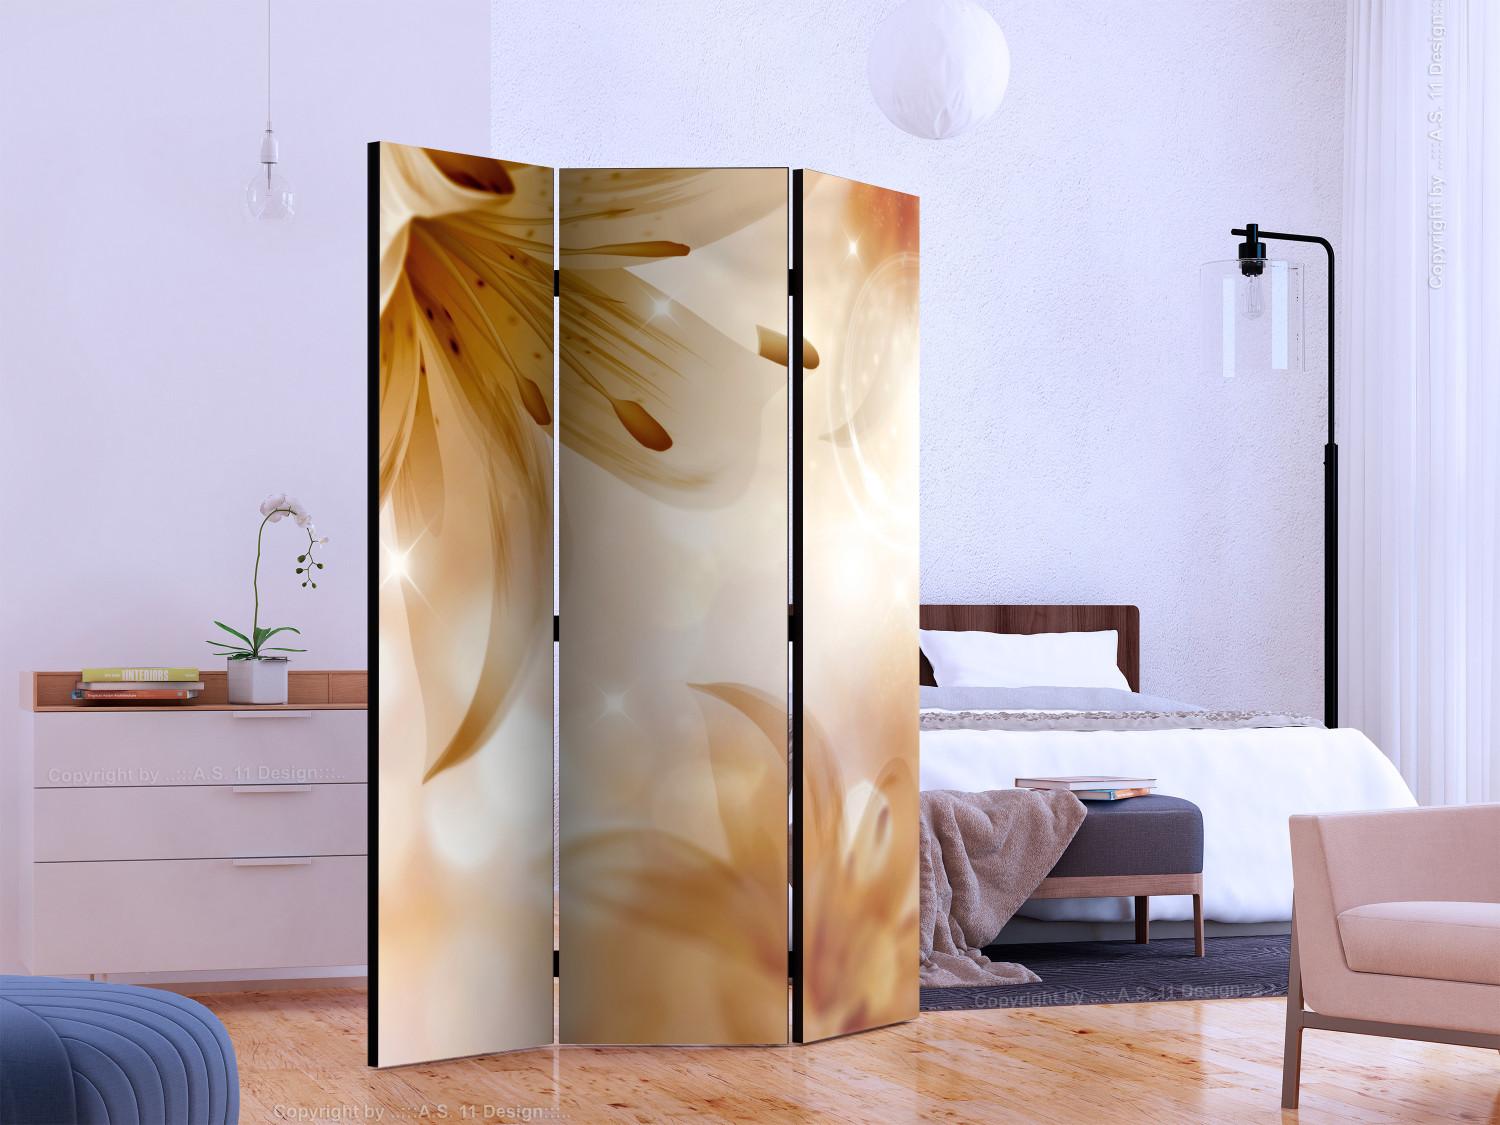 Room Divider Golden Years - illusion of beige lily flowers on an abstract background